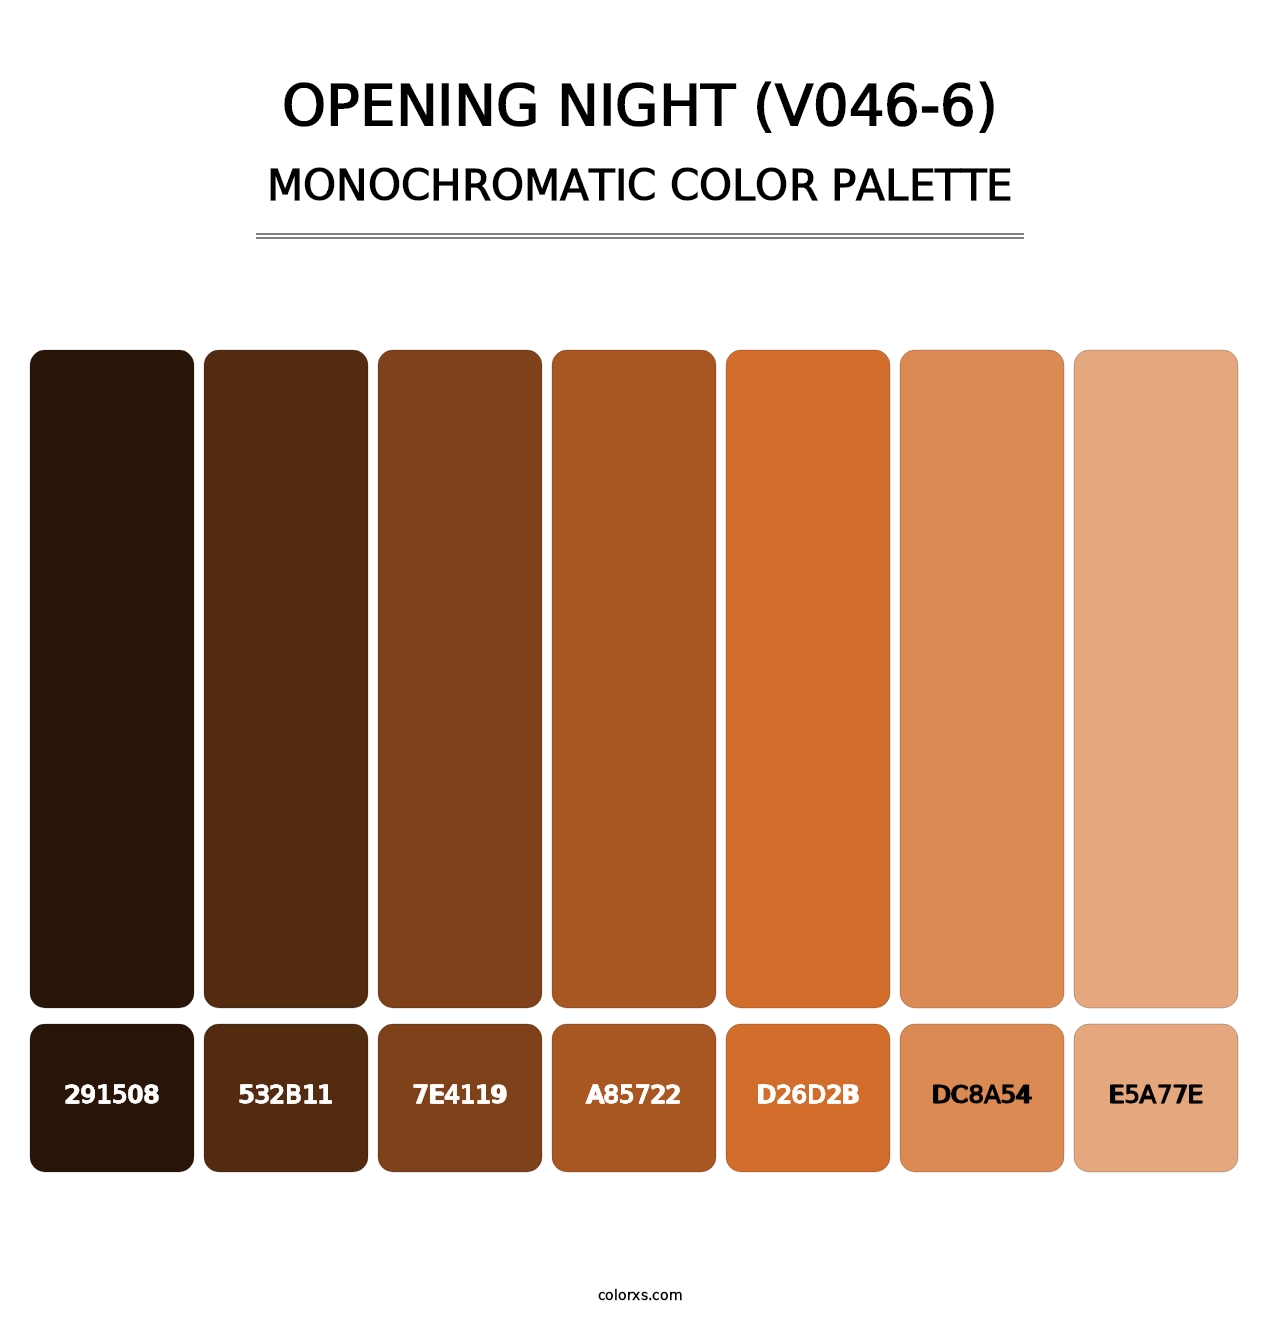 Opening Night (V046-6) - Monochromatic Color Palette